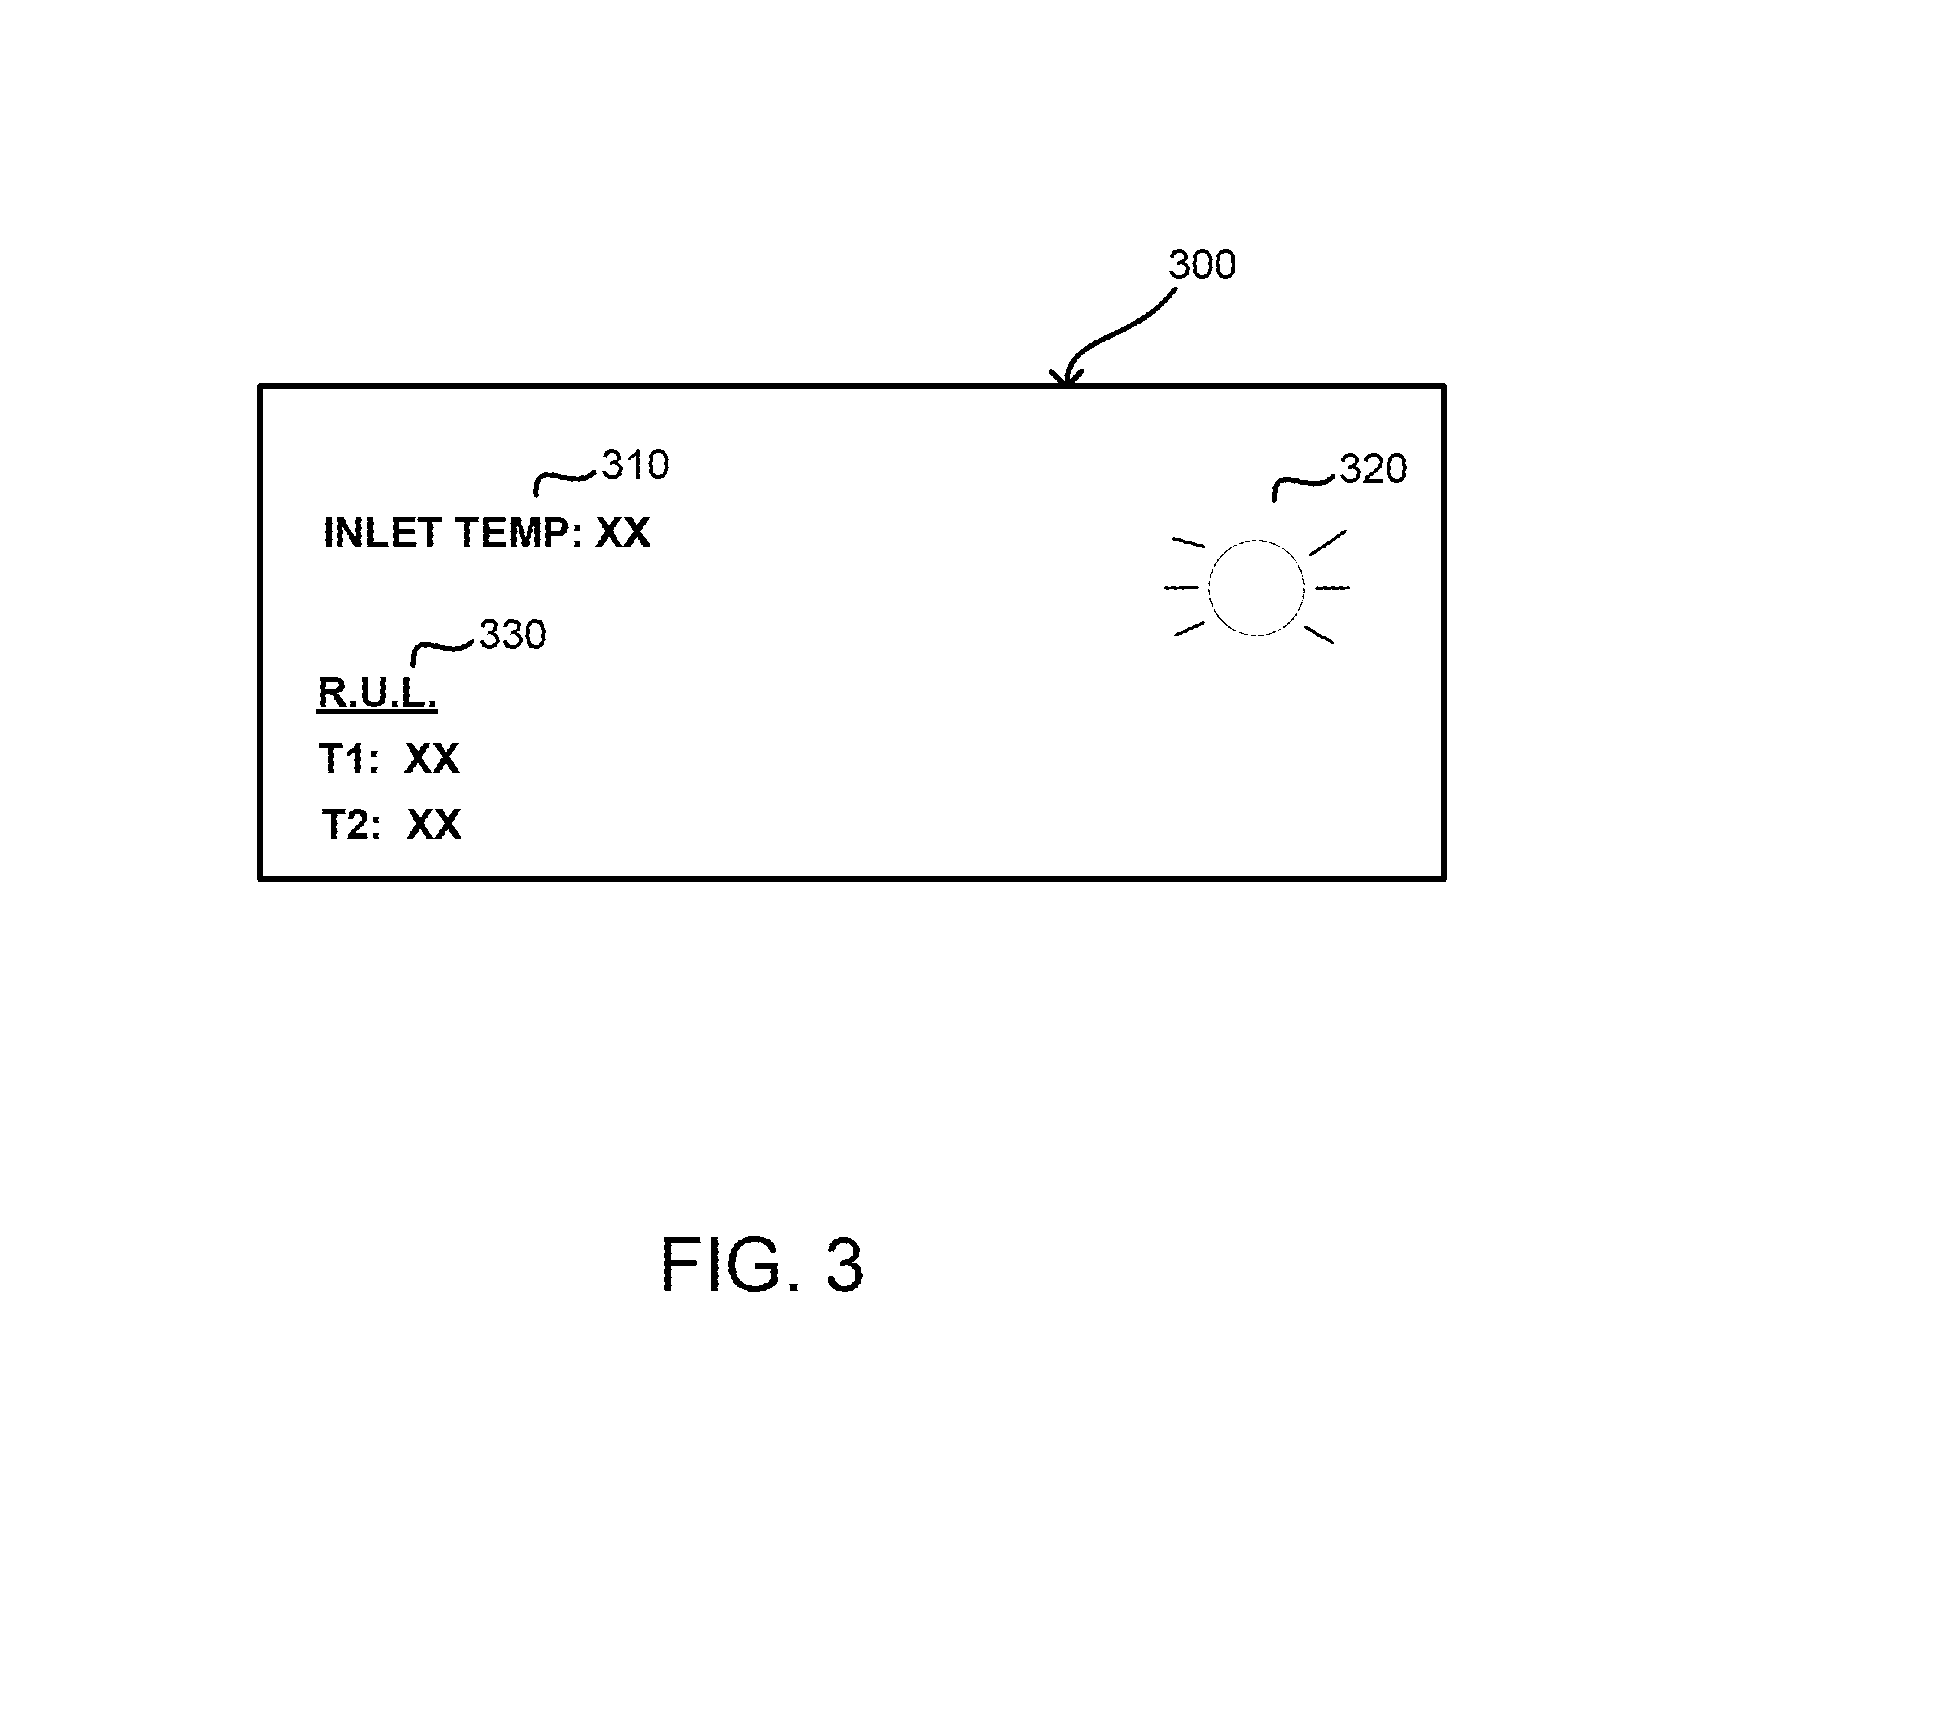 Operations support systems and methods for calculating and evaluating turbine temperatures and health